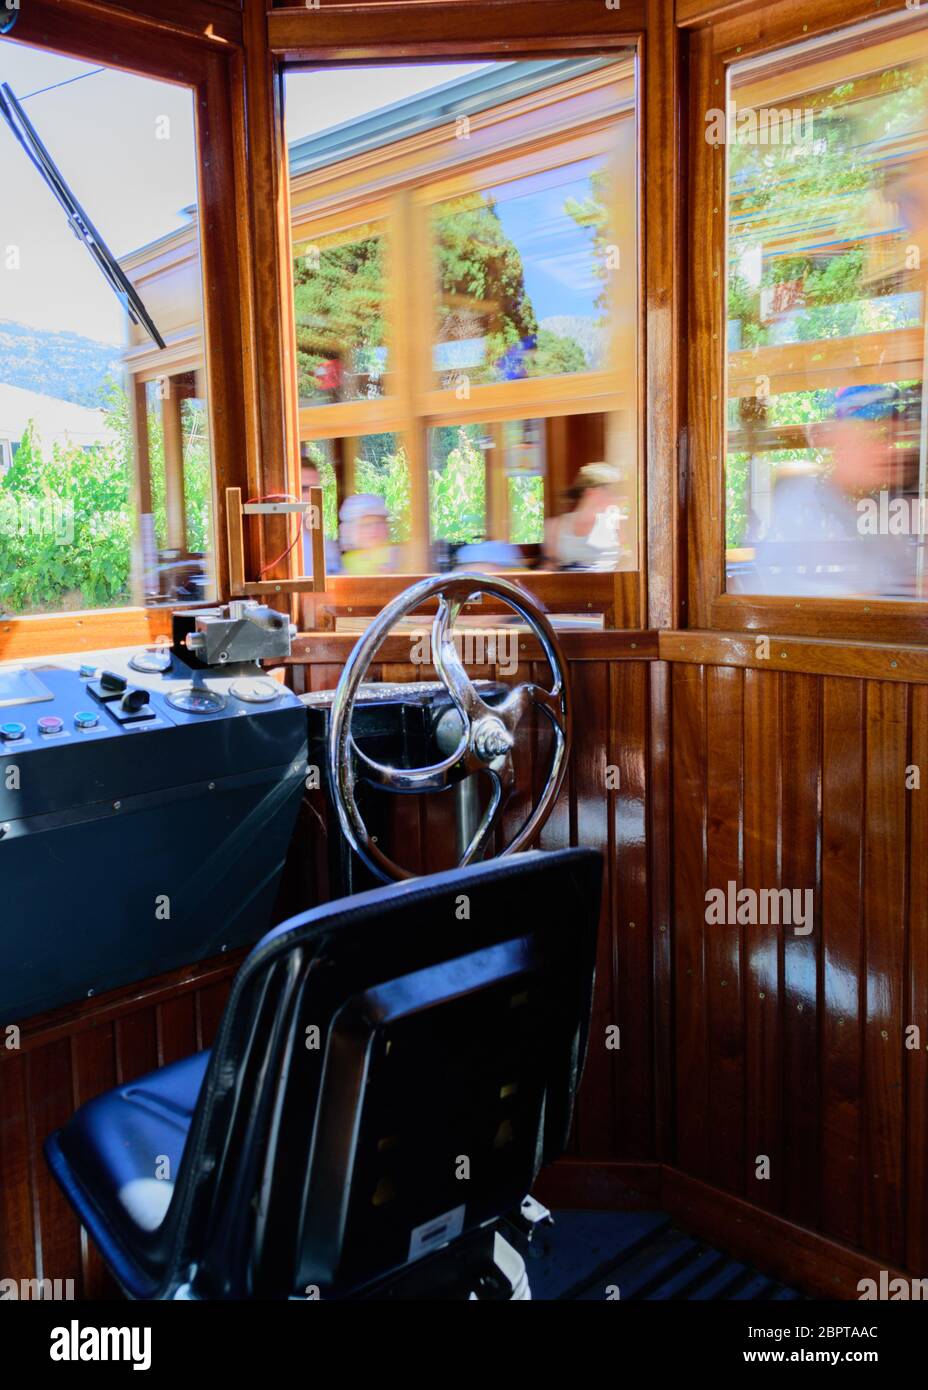 The driver's seat of an old vintage tram Stock Photo